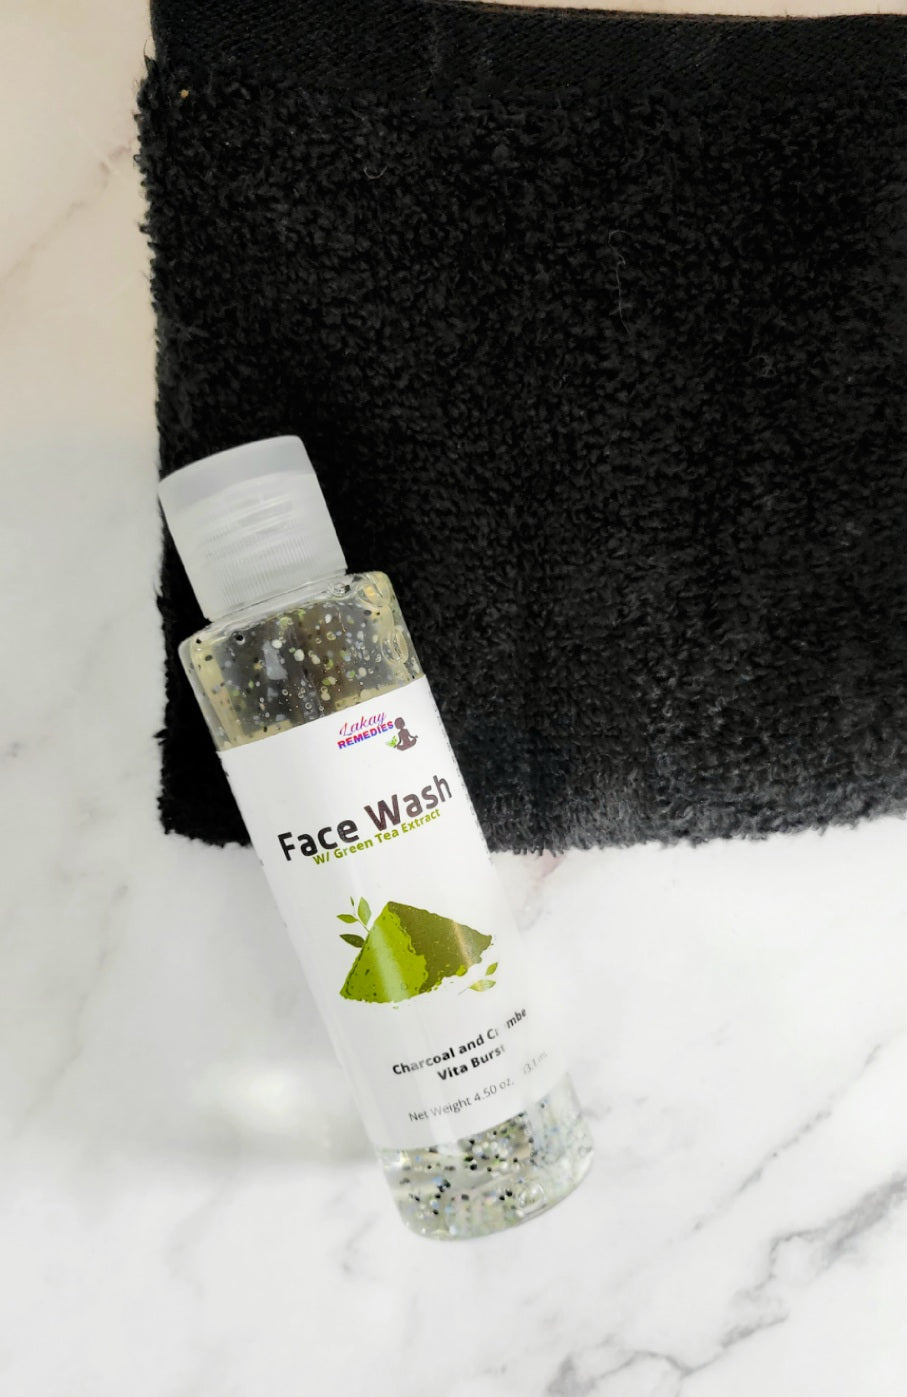 Charcoal and Crambe Vita Burst Face Wash with Green Tea Extract